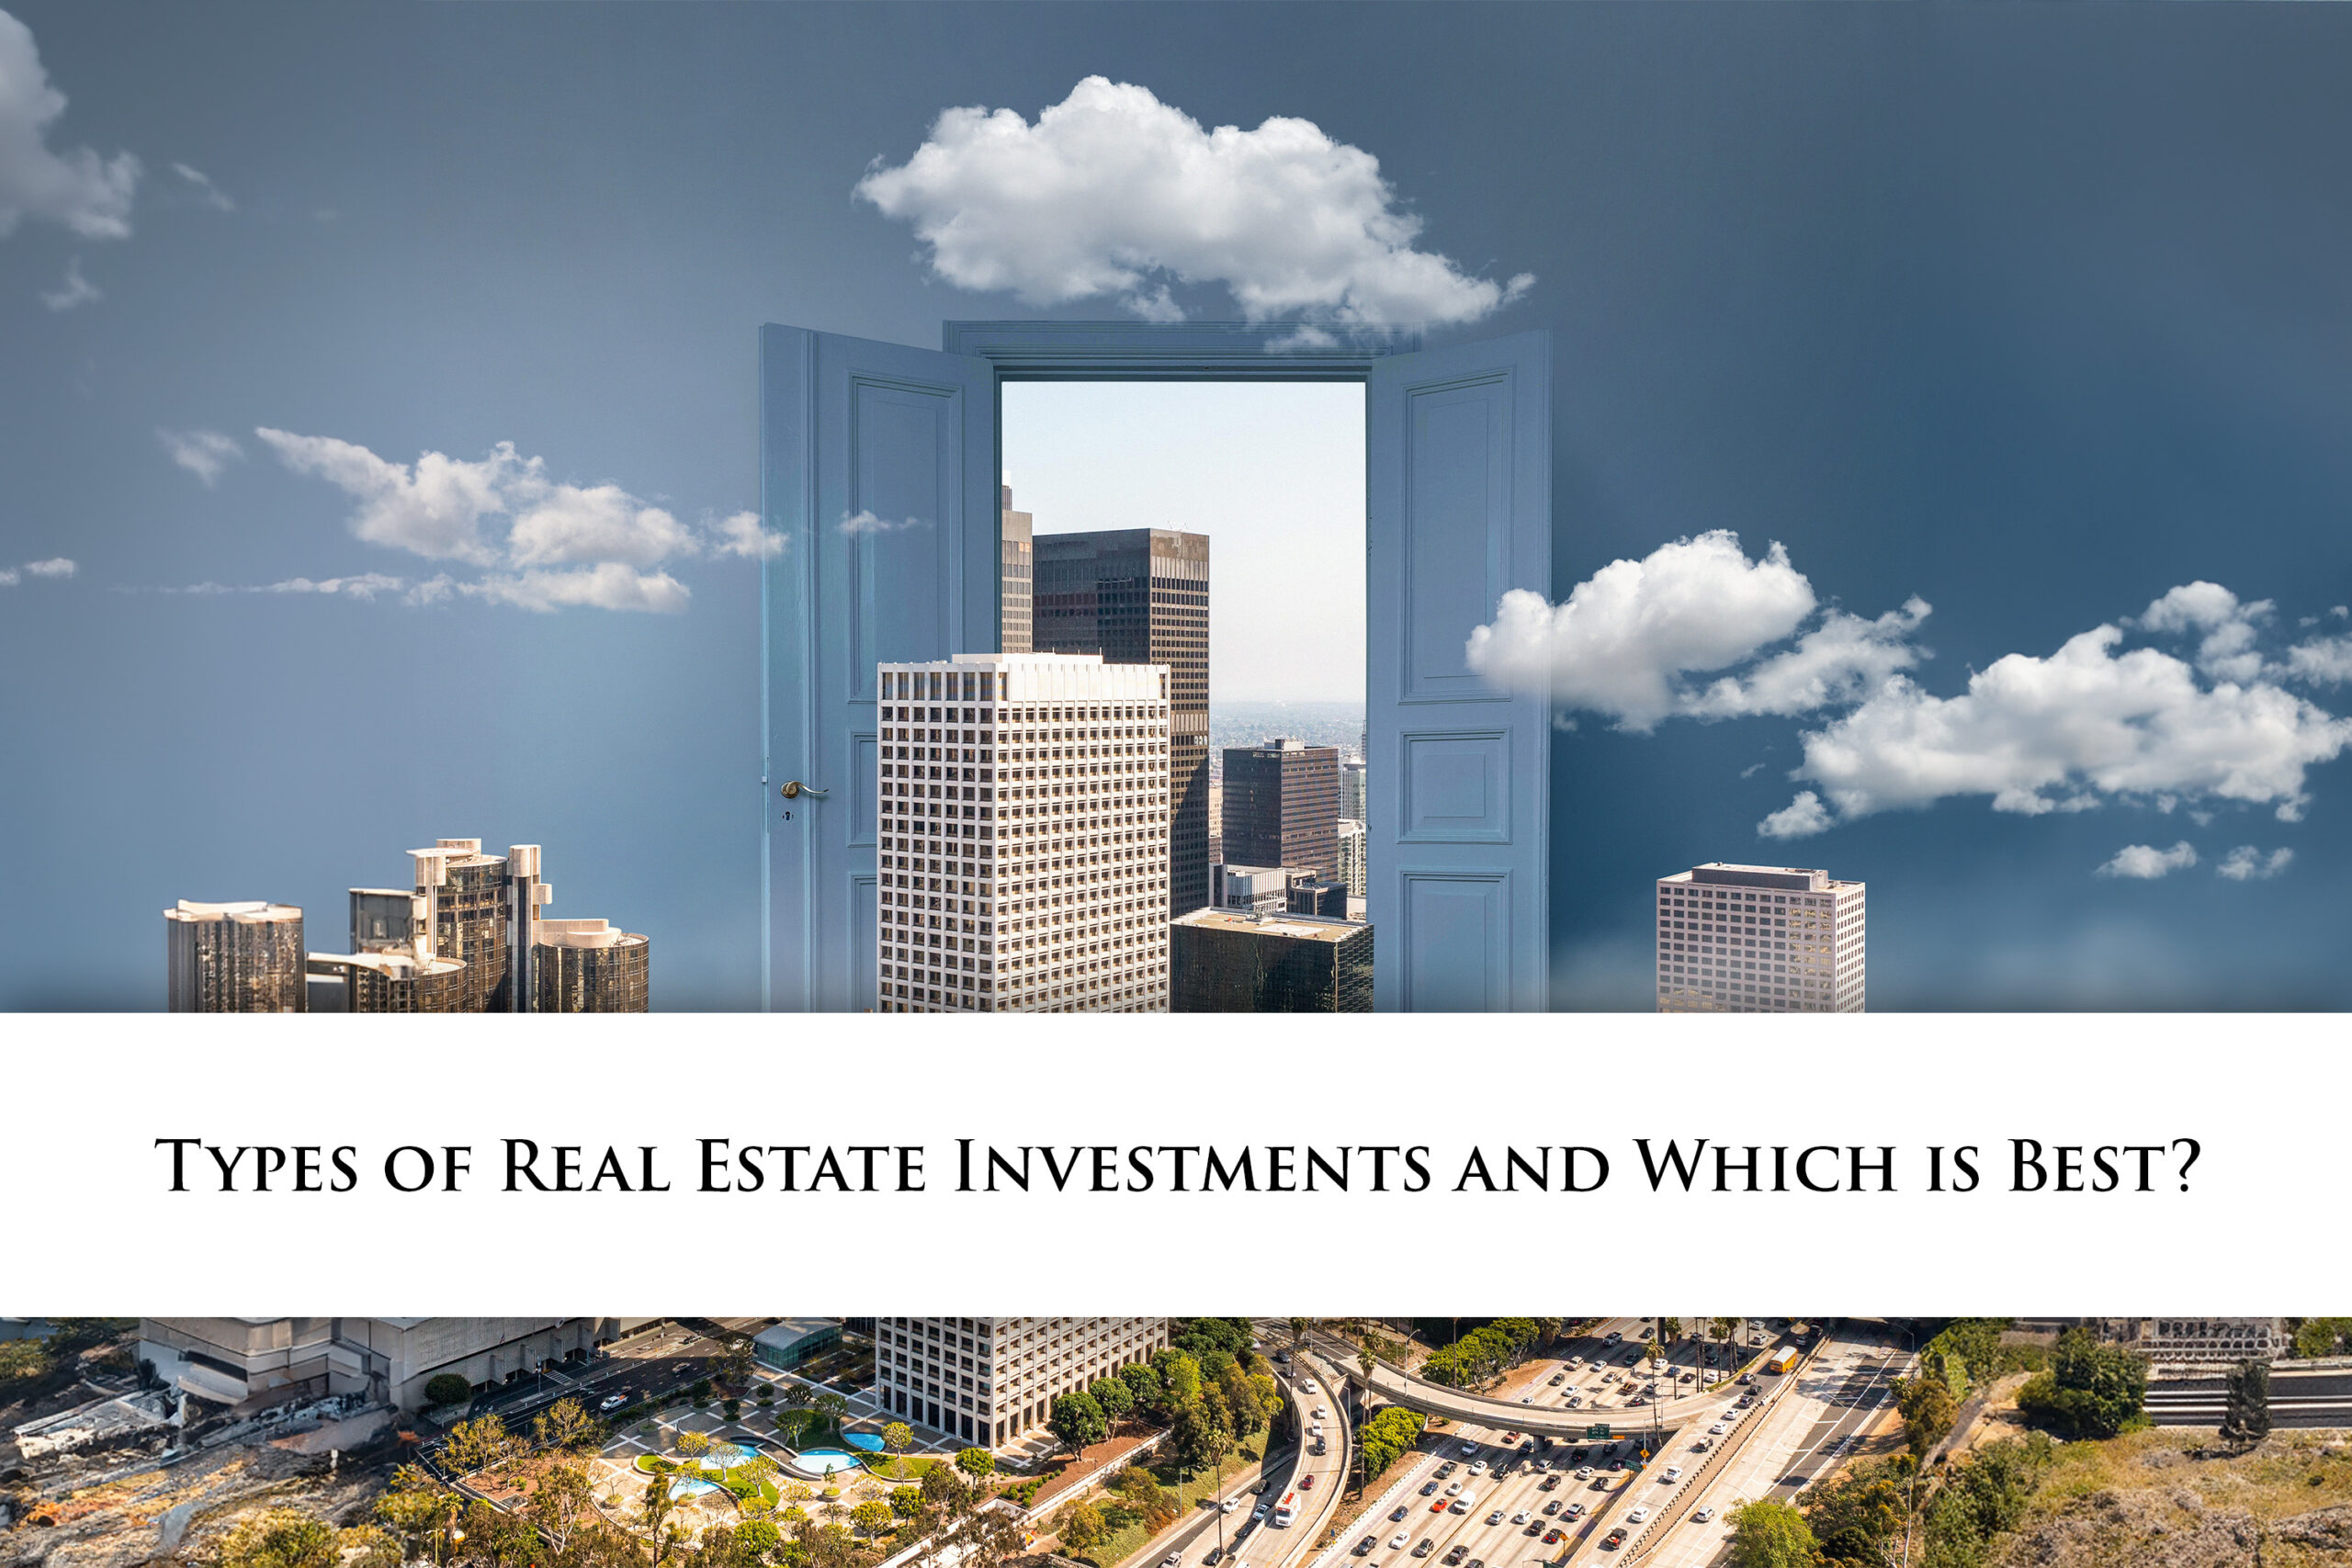 Types of Real Estate Investments and Which Is Best